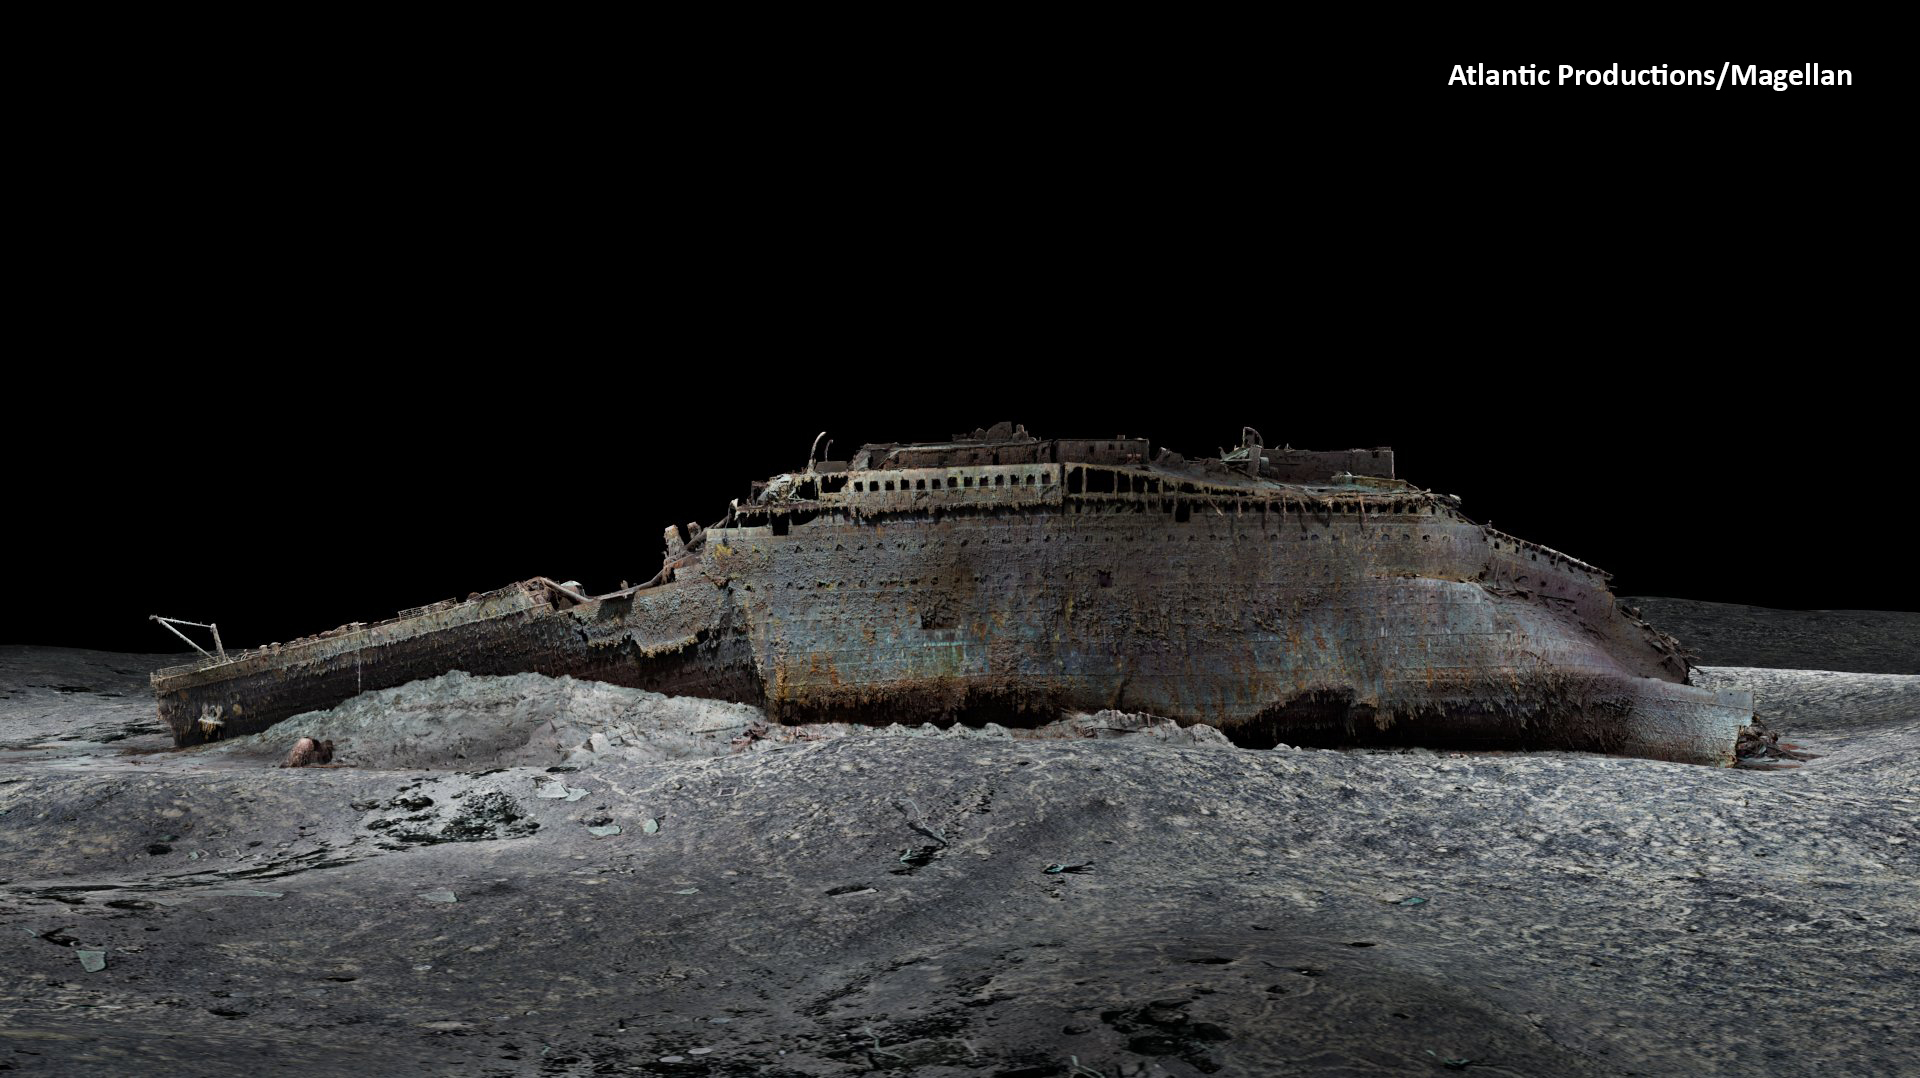 A remarkable new view of the Titanic shipwreck is here, thanks to deep-sea  mappers - OPB